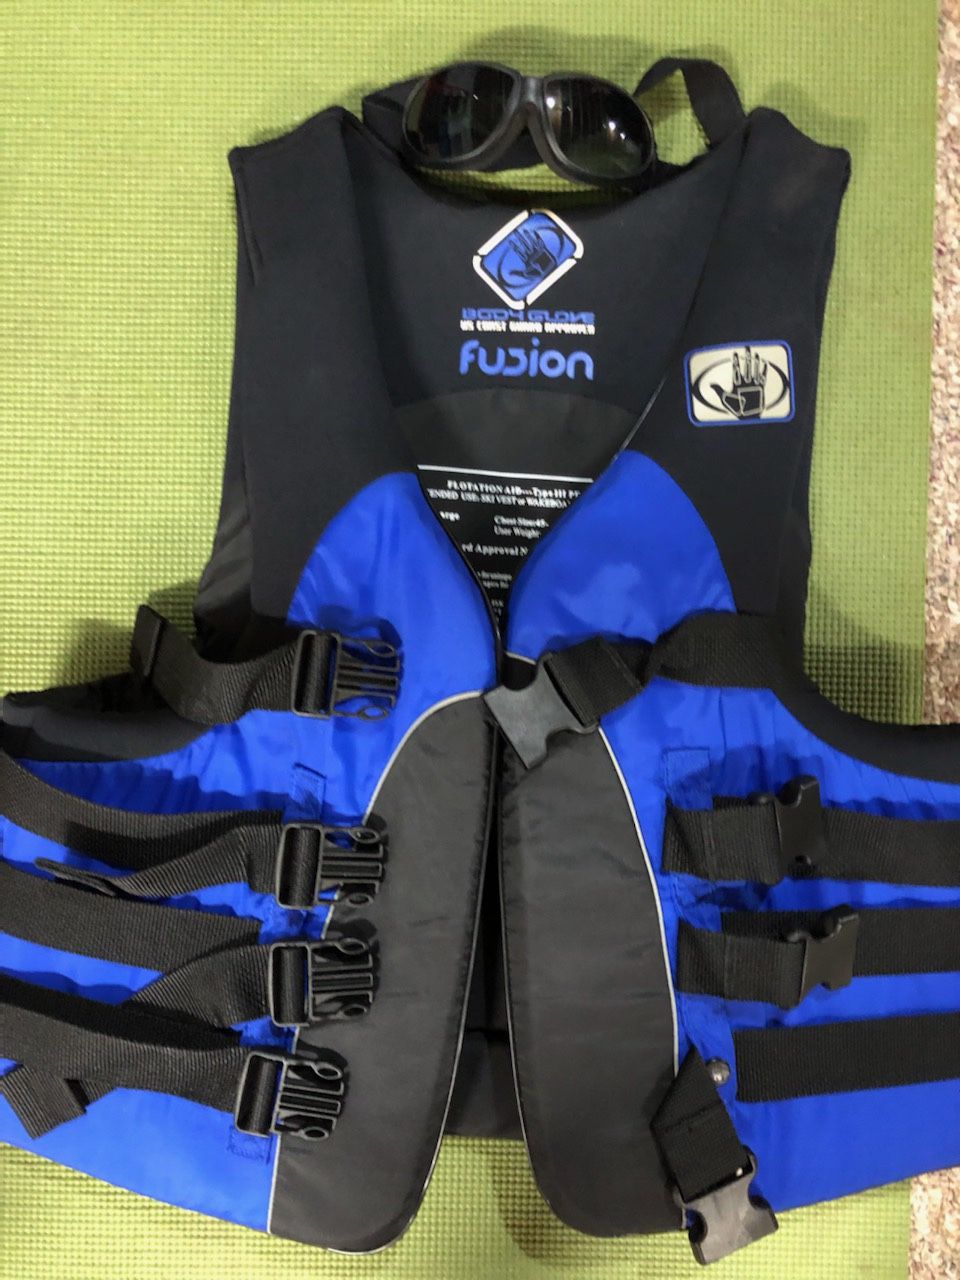 Fusion floatation aid XL with goggles